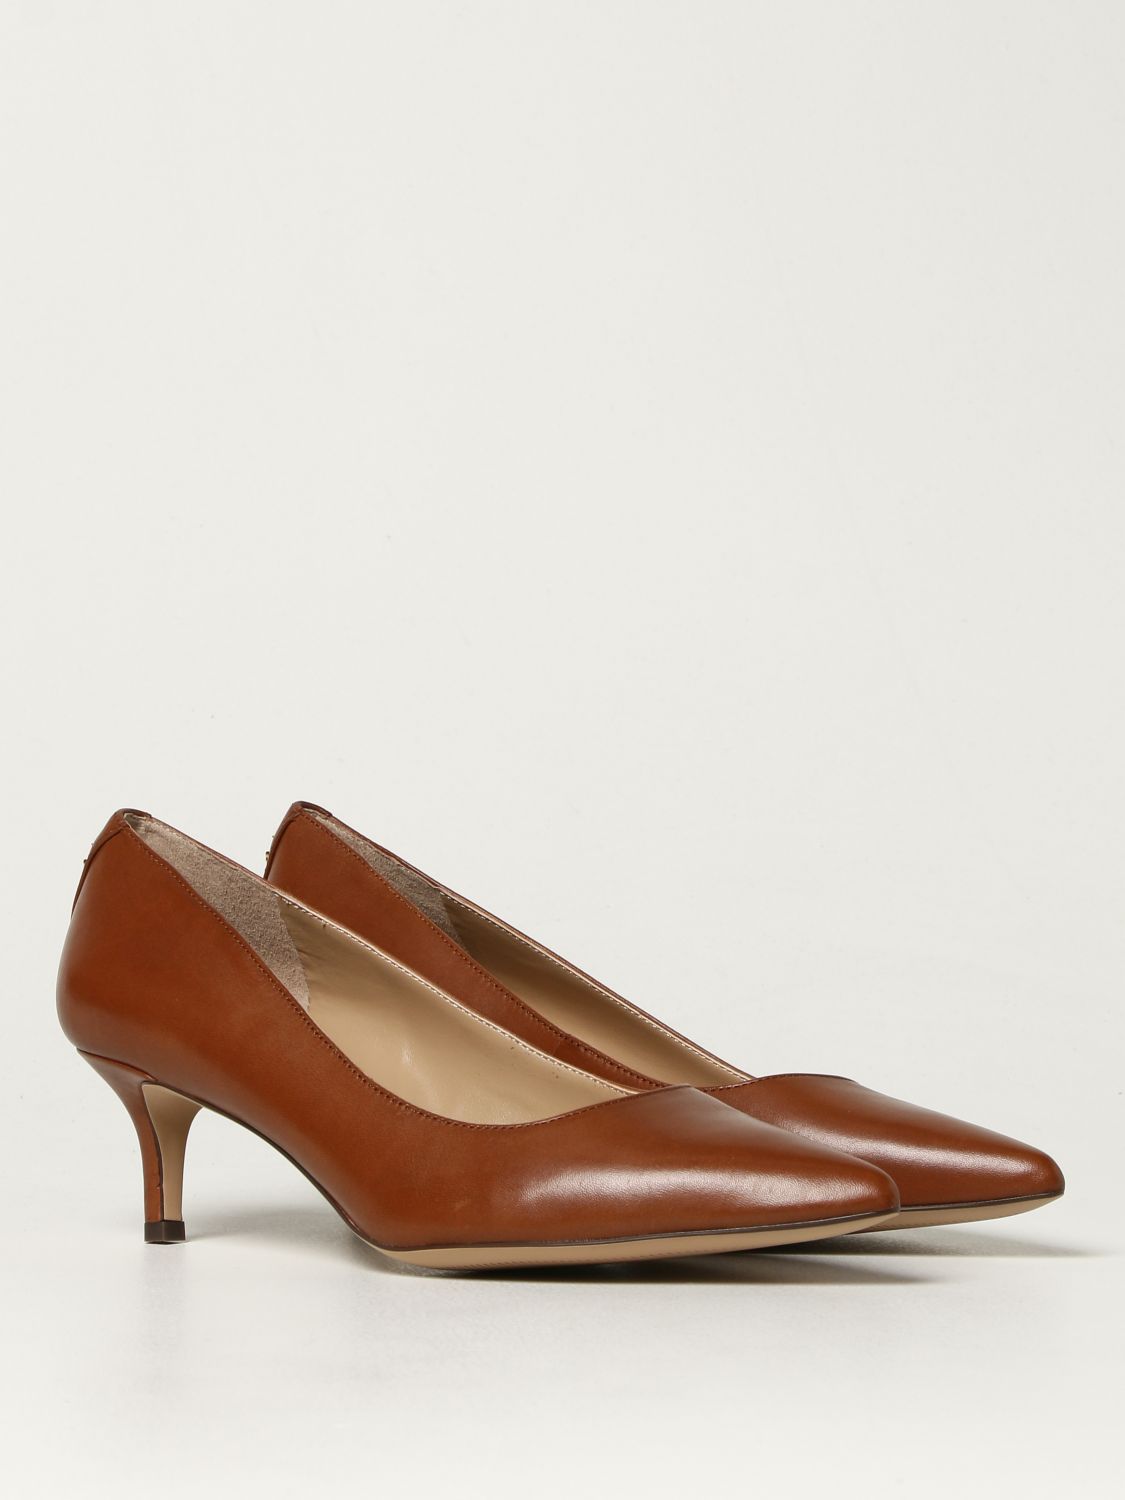 Pumps Lauren Ralph Lauren: Pumps Lauren Ralph Lauren in leather leather 2